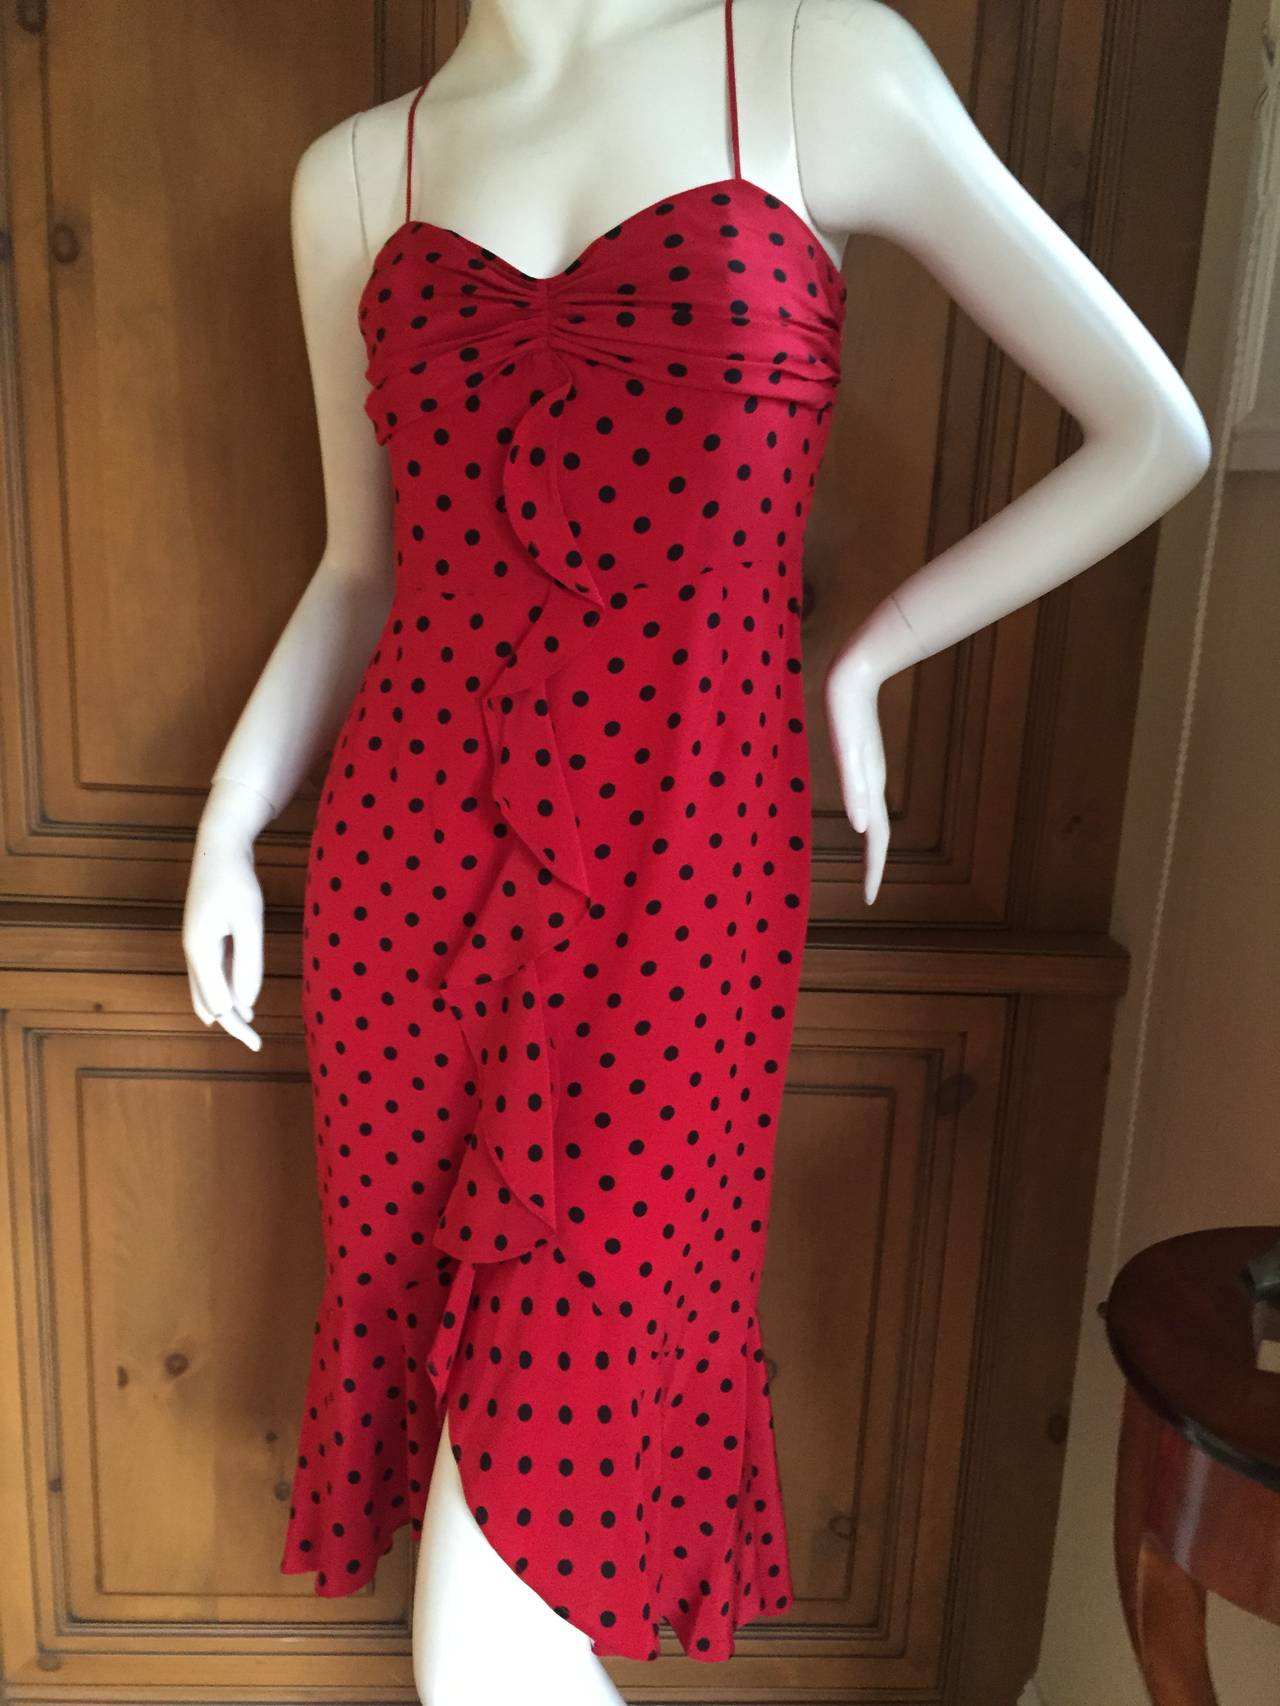 MOSCHINO Vintage Red Polkadot Silk Dress w scarf/belt
This is so beautiful, the photos don't capture its charm

sz 8 US

Bust 35